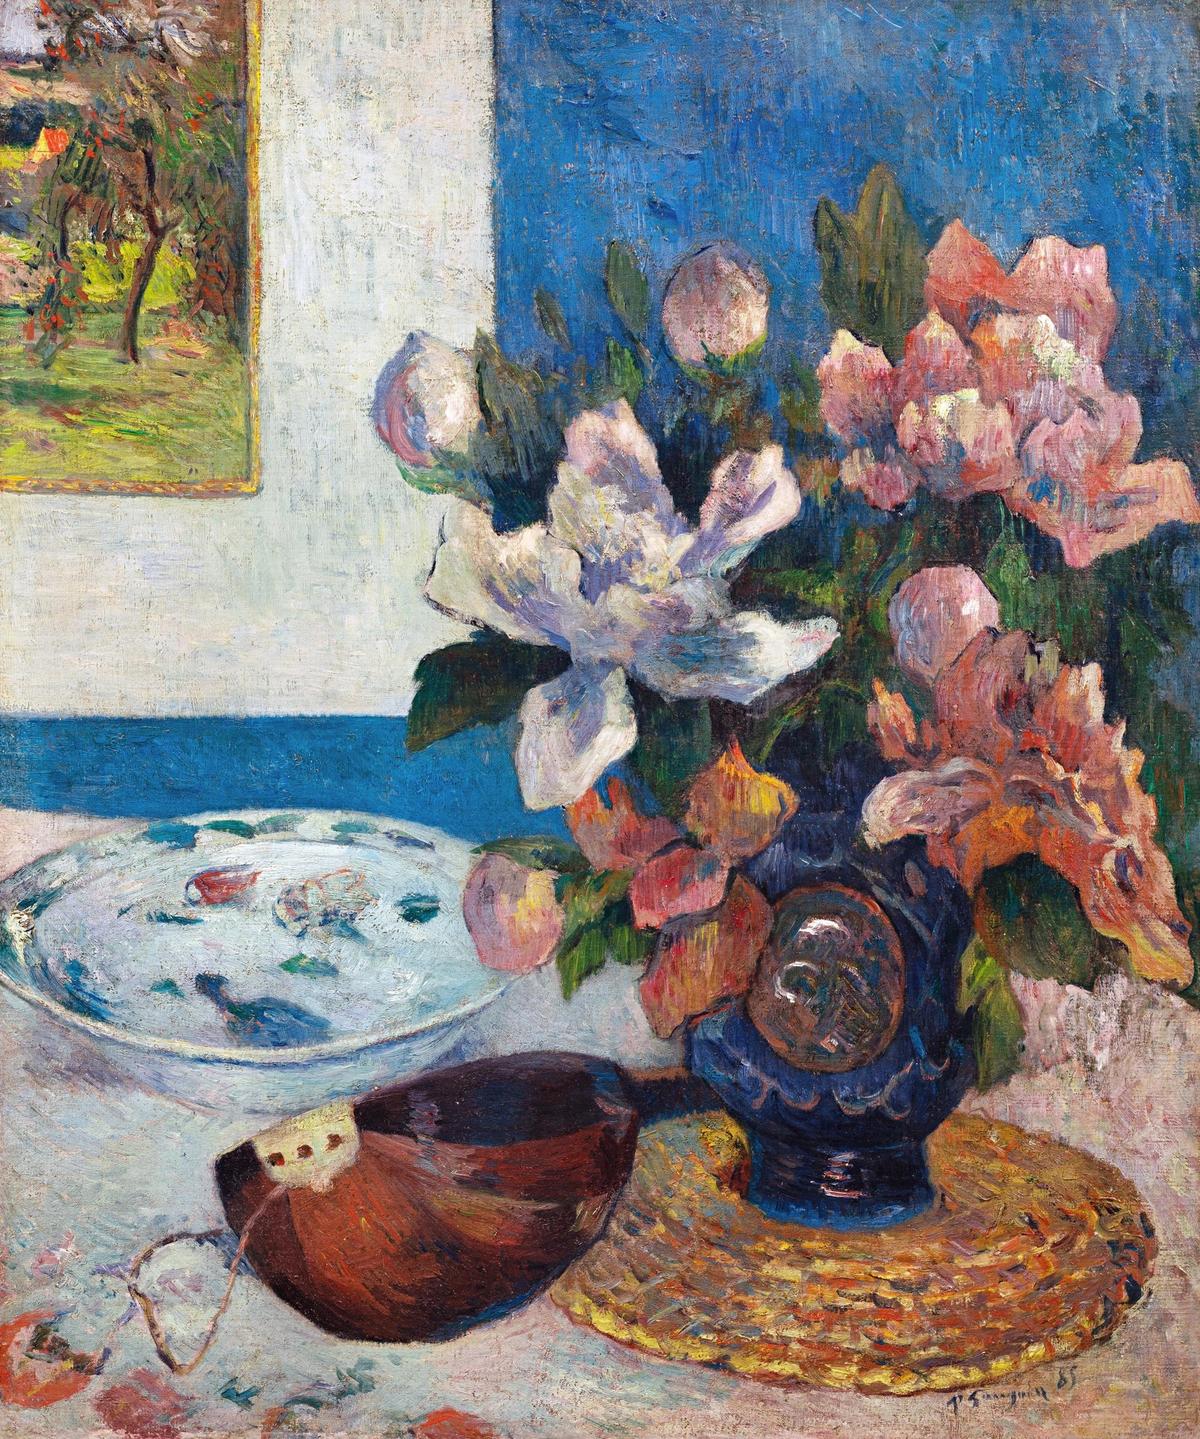 Paul Gauguin's rare still-life Nature morte avec pivoines de chine et mandoline (1885) is among the four works being offered in Sotheby's New York modern art evening sale